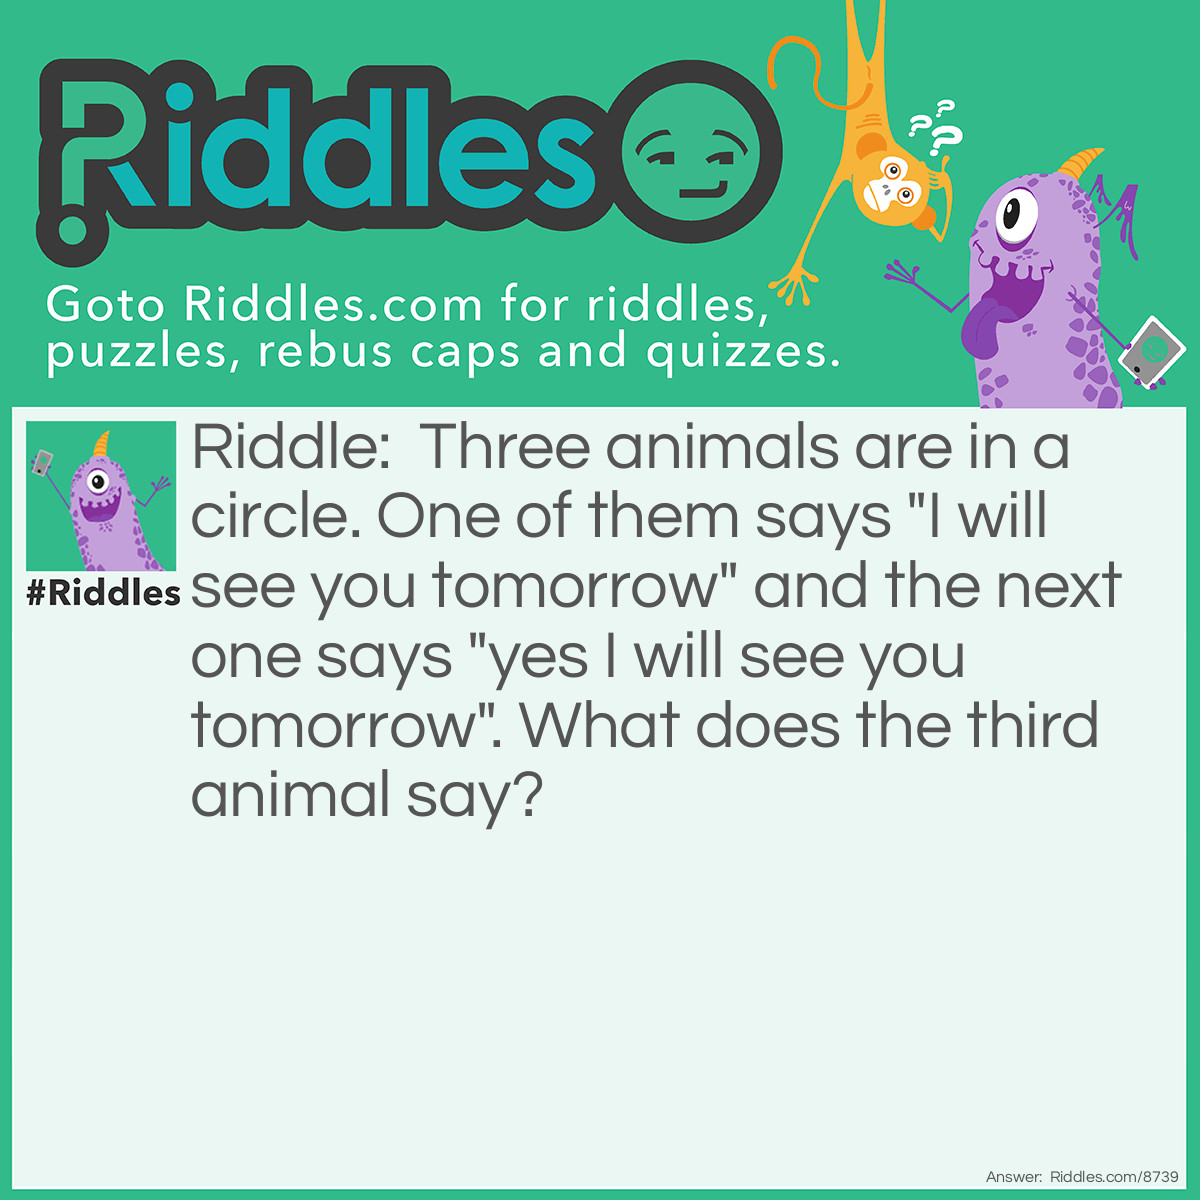 Riddle: Three animals are in a circle. One of them says "I will see you tomorrow" and the next one says "yes I will see you tomorrow". What does the third animal say? Answer: The last animal says "I will see you today" because it was in the night and it had gone to tomorrow while they were all talking.